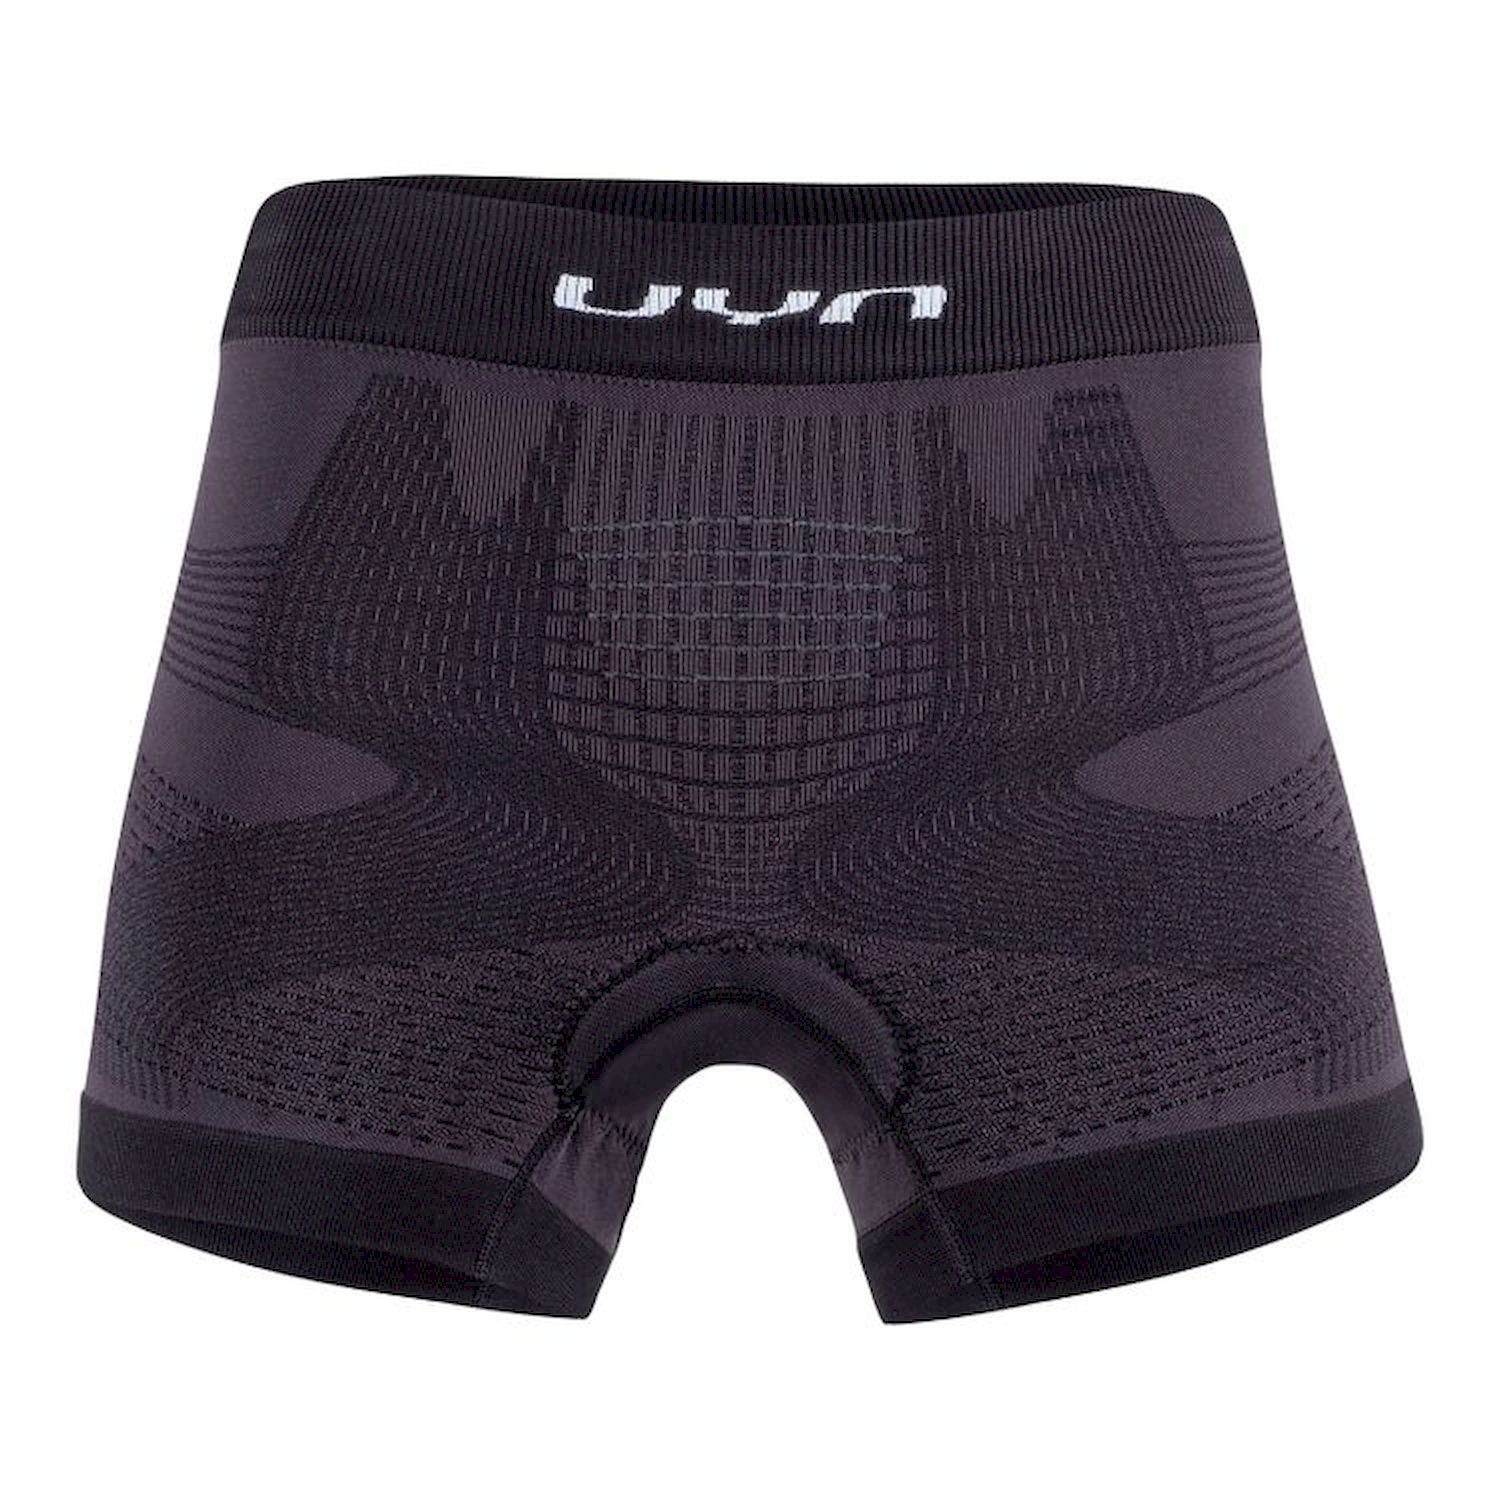 Uyn Motyon Uw Boxer With Pad - Ropa interior - Mujer